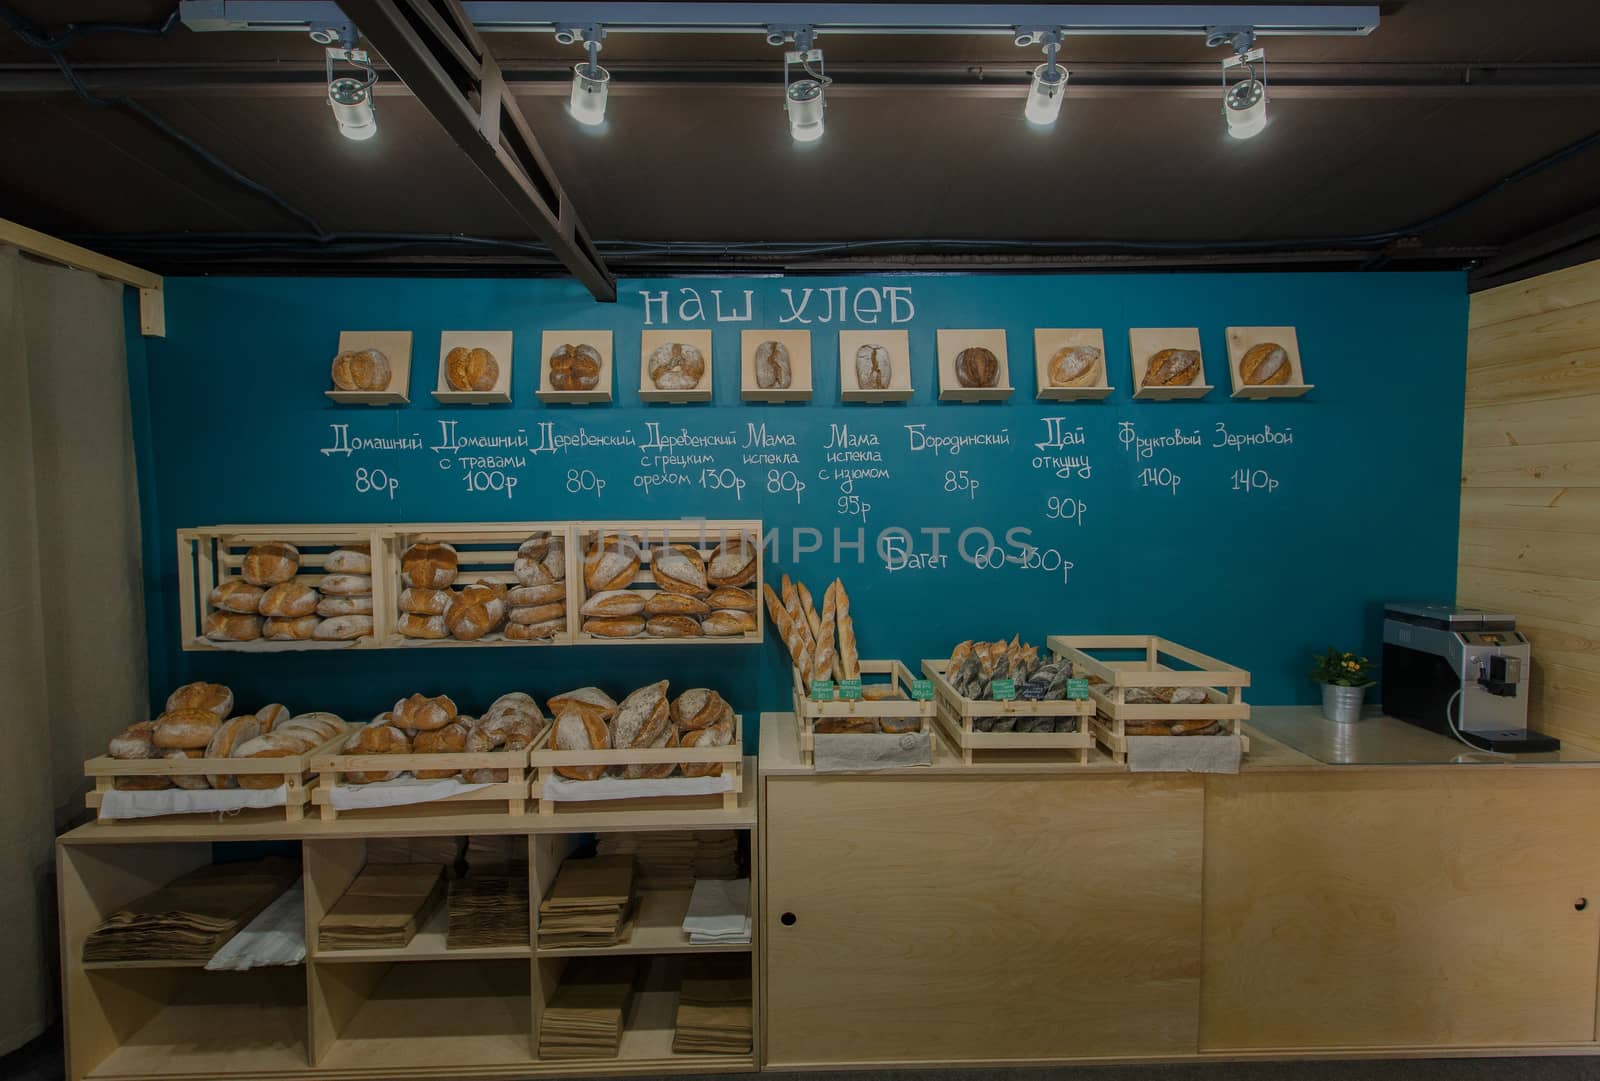 Fresh baked goods are beautifully arranged on display in wooden crates.